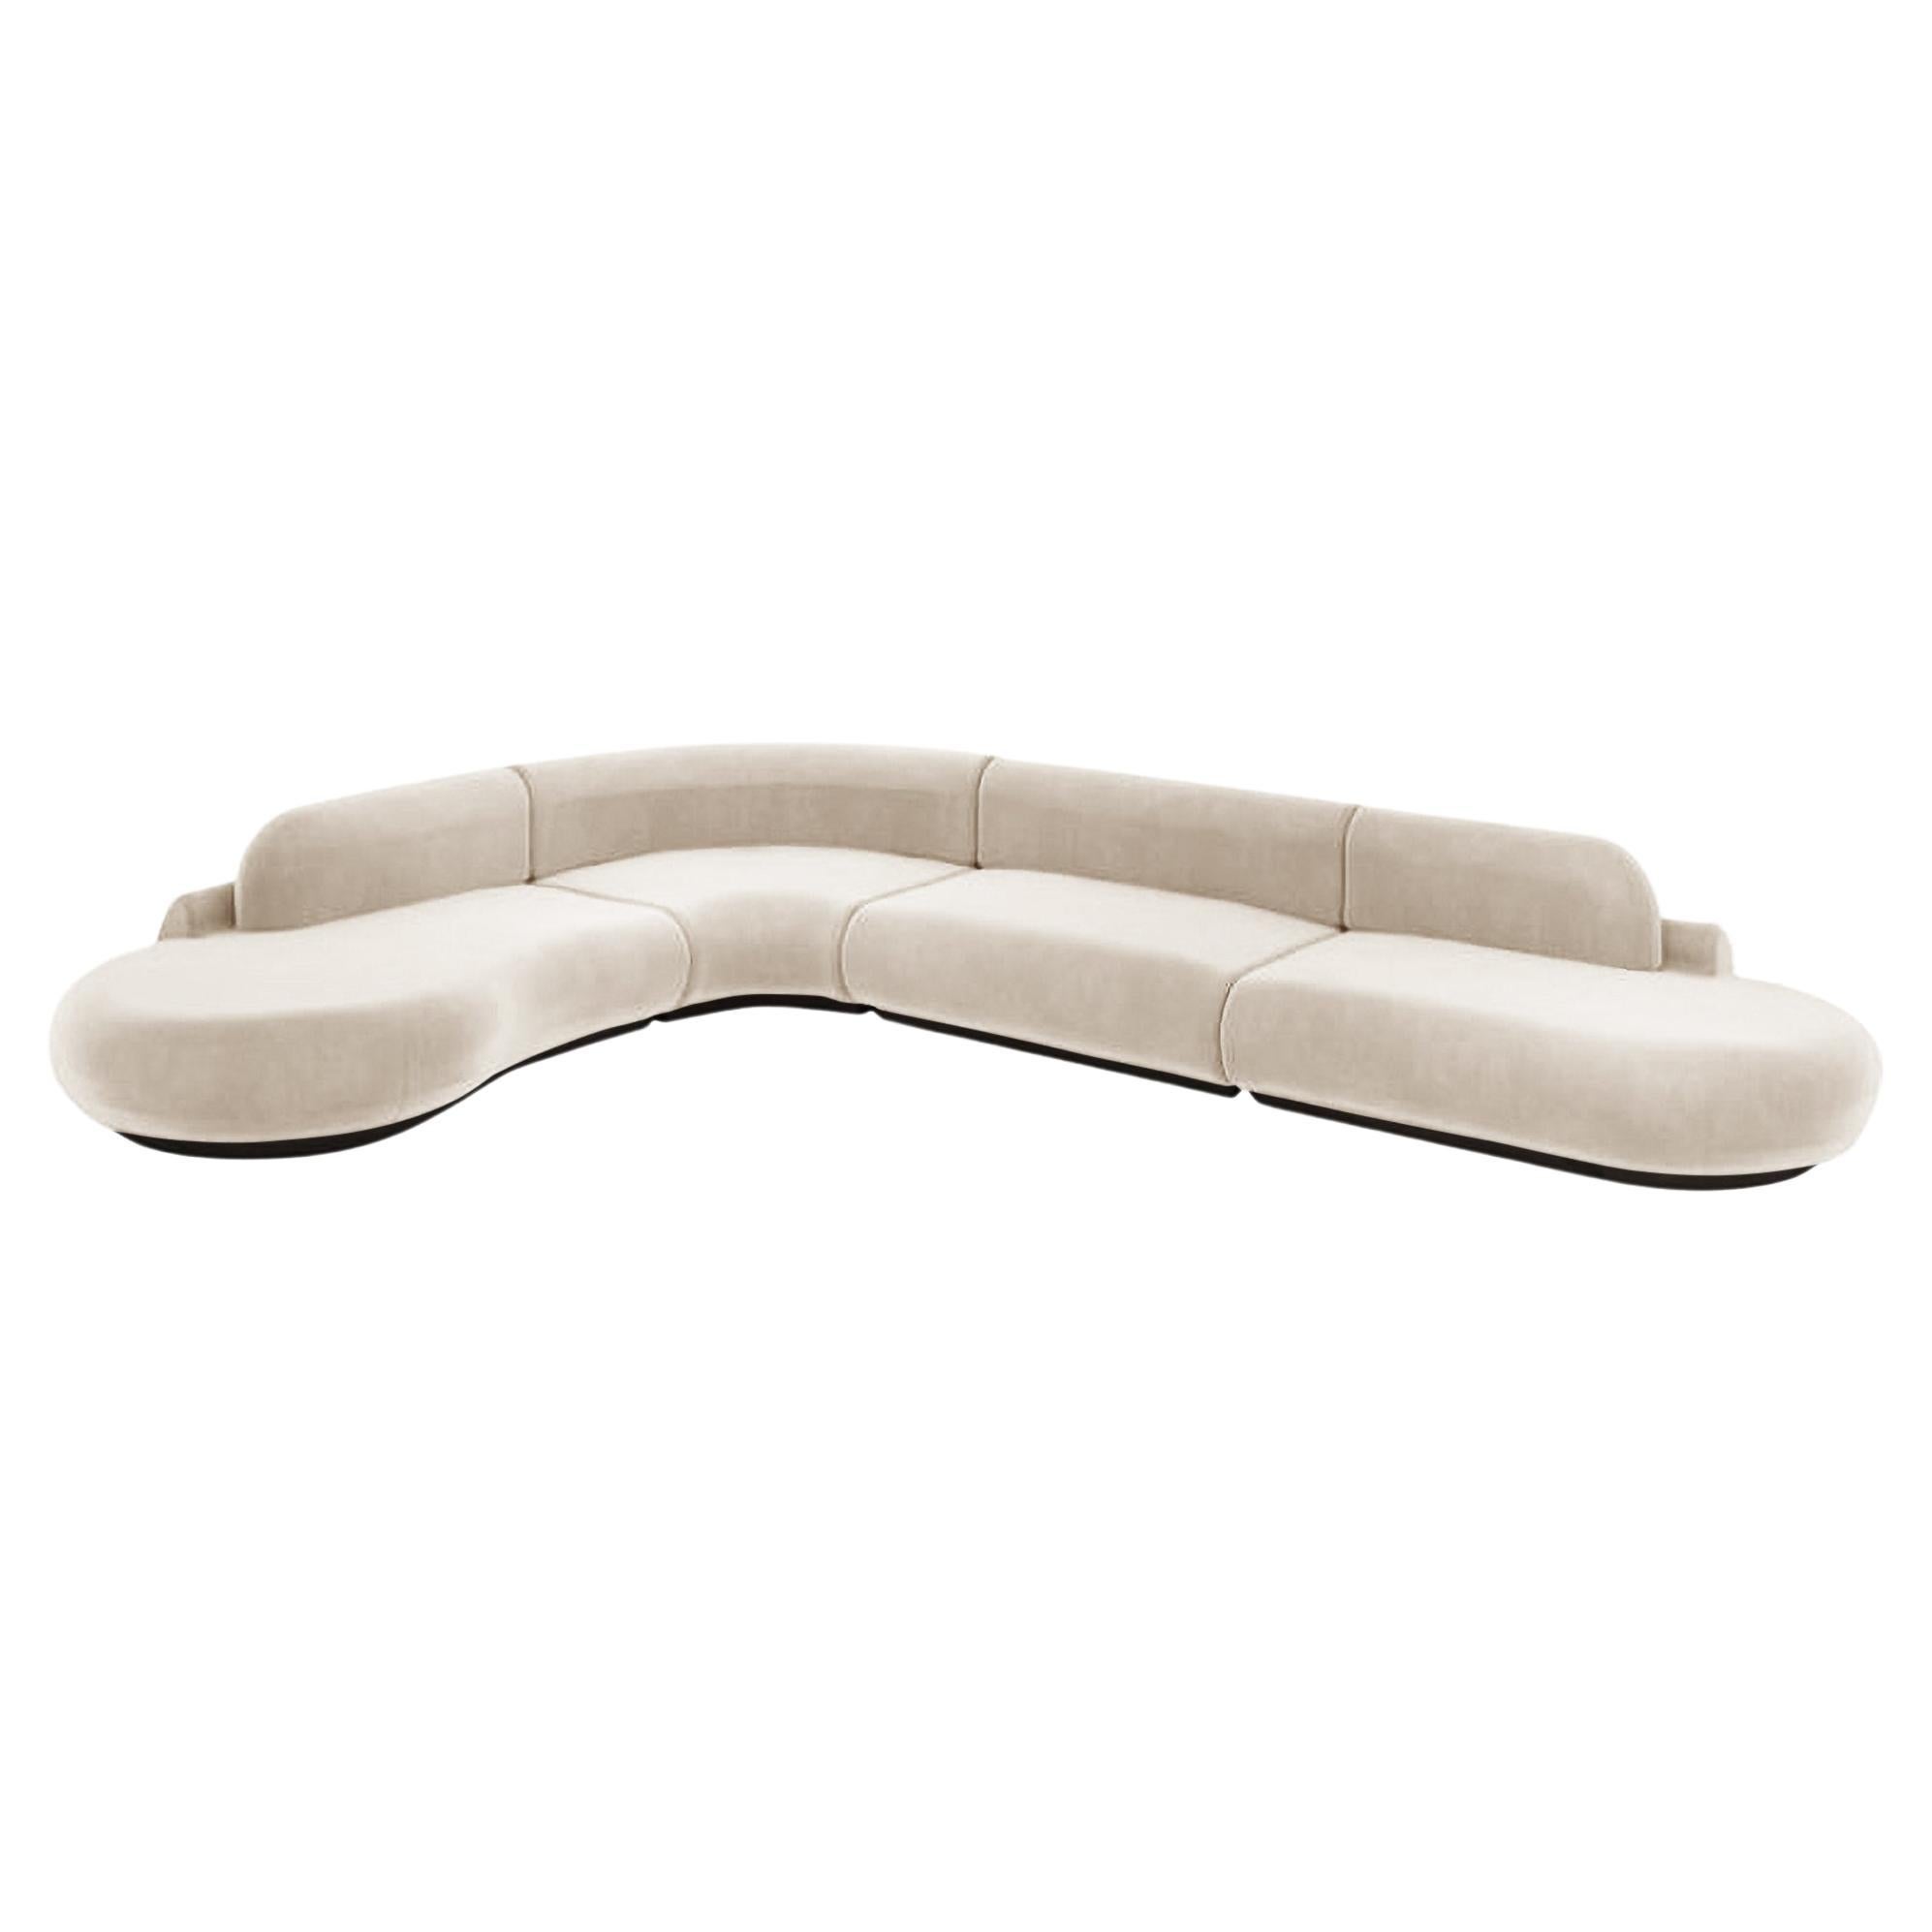 Naked Curved Sectional Sofa, 4 Piece with Beech Ash-056-5 and Boucle Snow For Sale